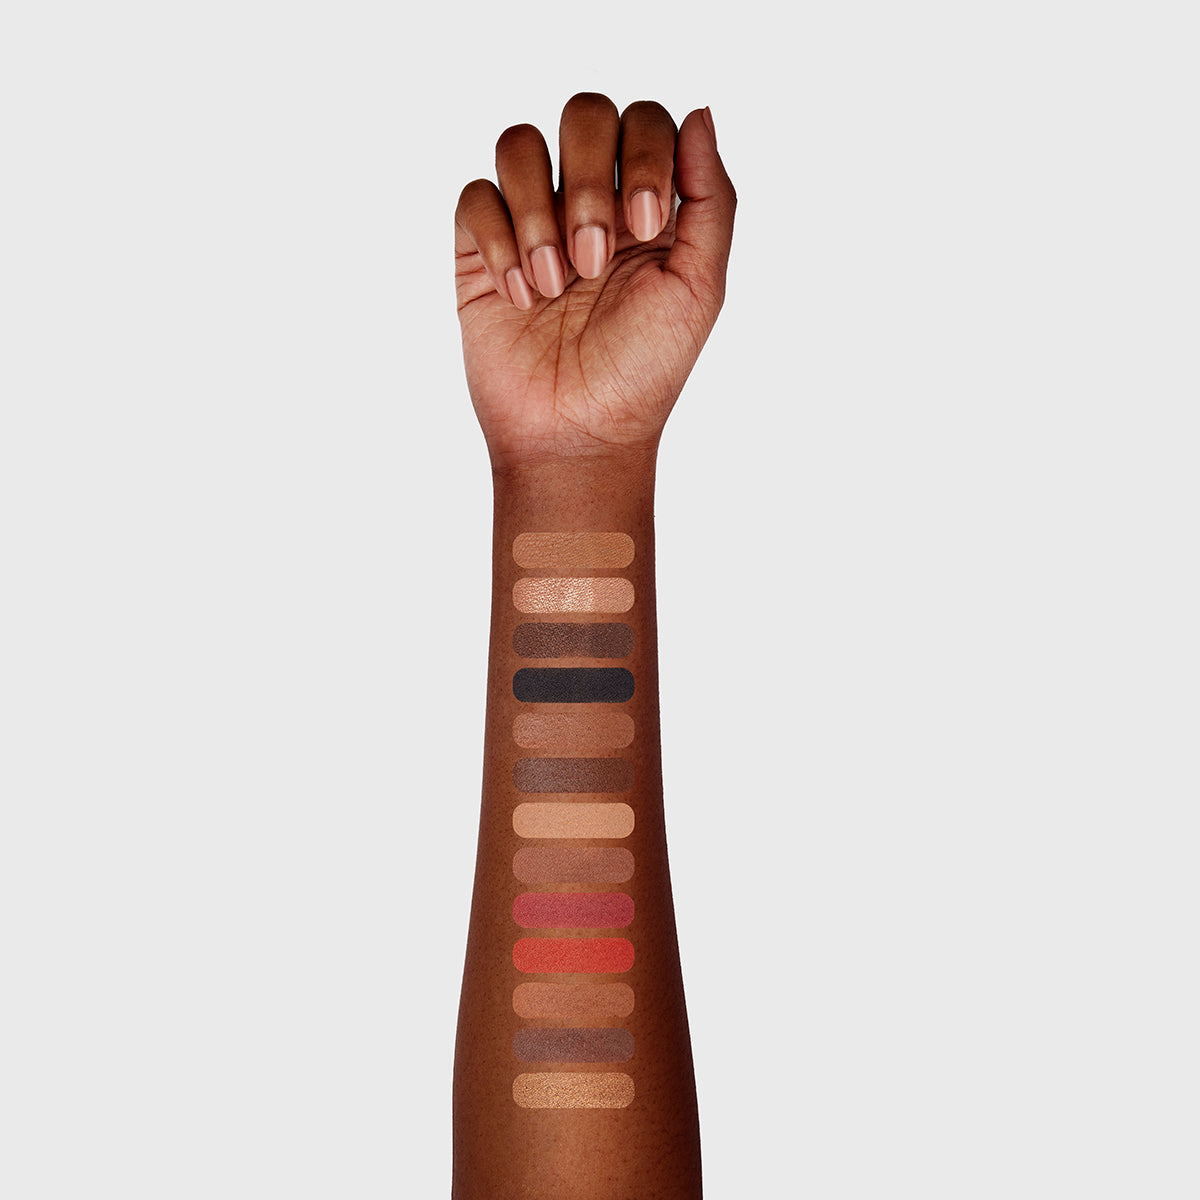 a photo of a dark-skinned woman's arm with 13 swatches showing all 13 cosmetics that are found in the fold out face #5 deep palette